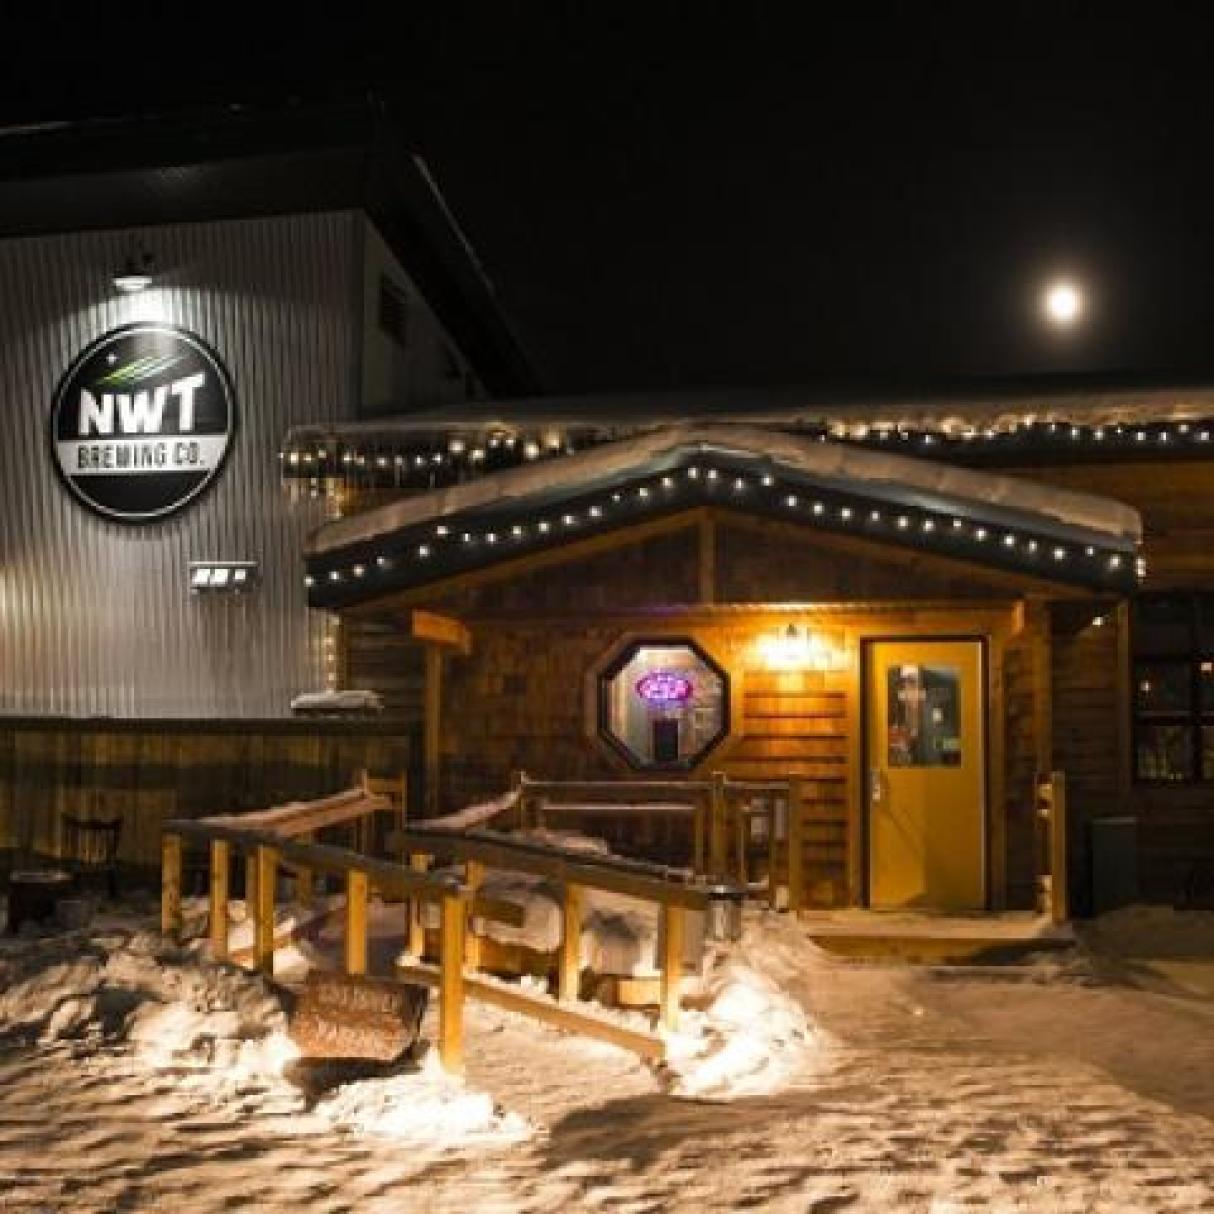 The exterior of NWT Brewing Co.